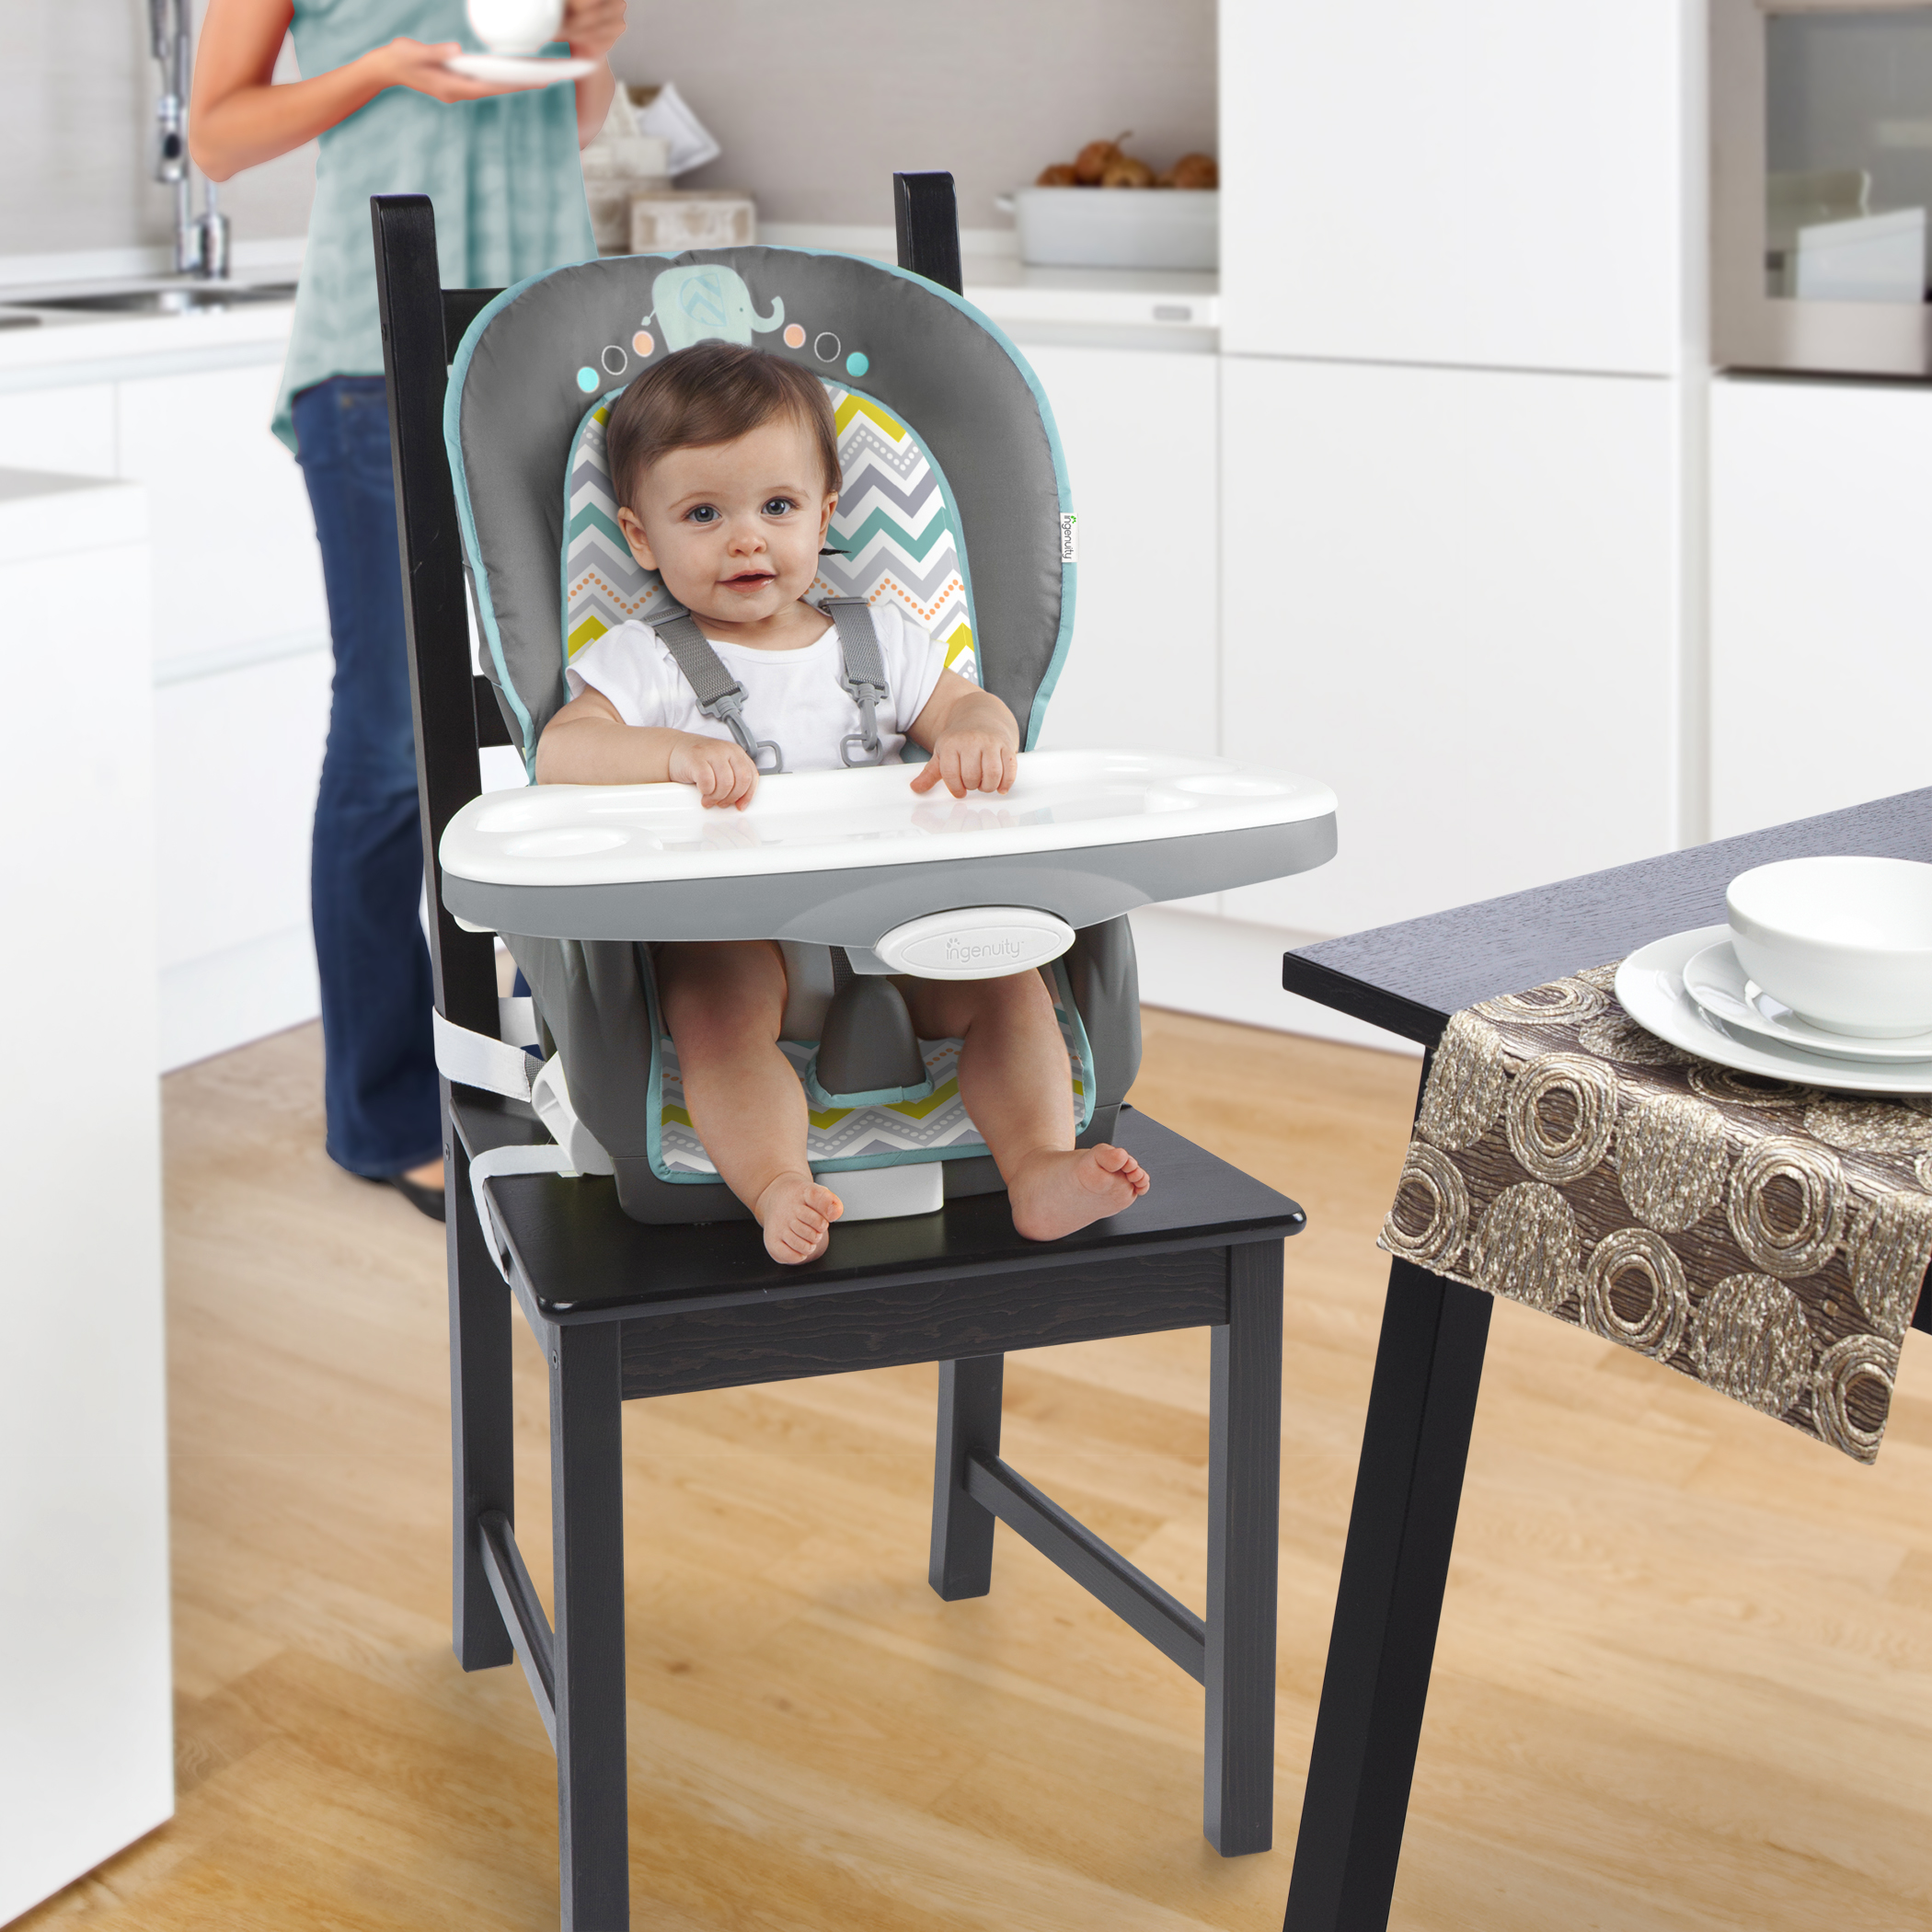 Ingenuity Trio 3-in-1 High Chair - Avondale - image 3 of 4